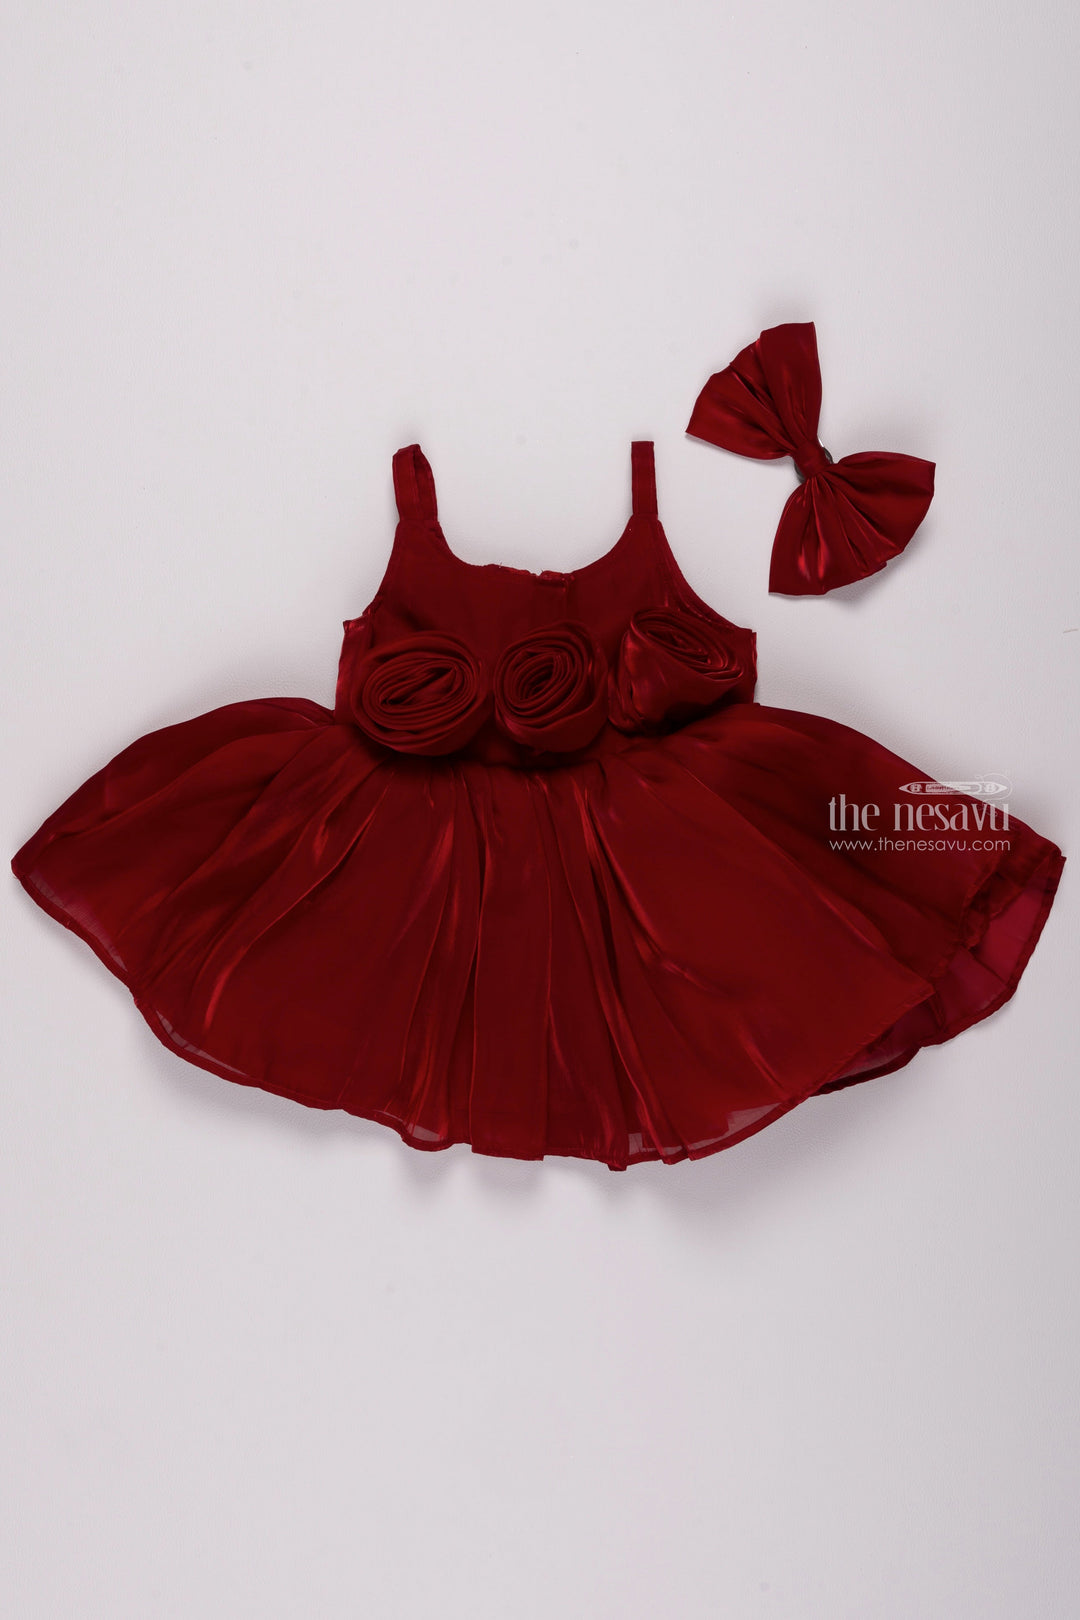 The Nesavu Girls Fancy Party Frock Crimson Blossom: Gorgeous Fabric Floral Applique on Red Organza Party Dress Nesavu 16 (1Y) / Red / Organza PF150A-16 Premium Organza Baby Dresses | Fancy Dresses for Little Girls | The Nesavu